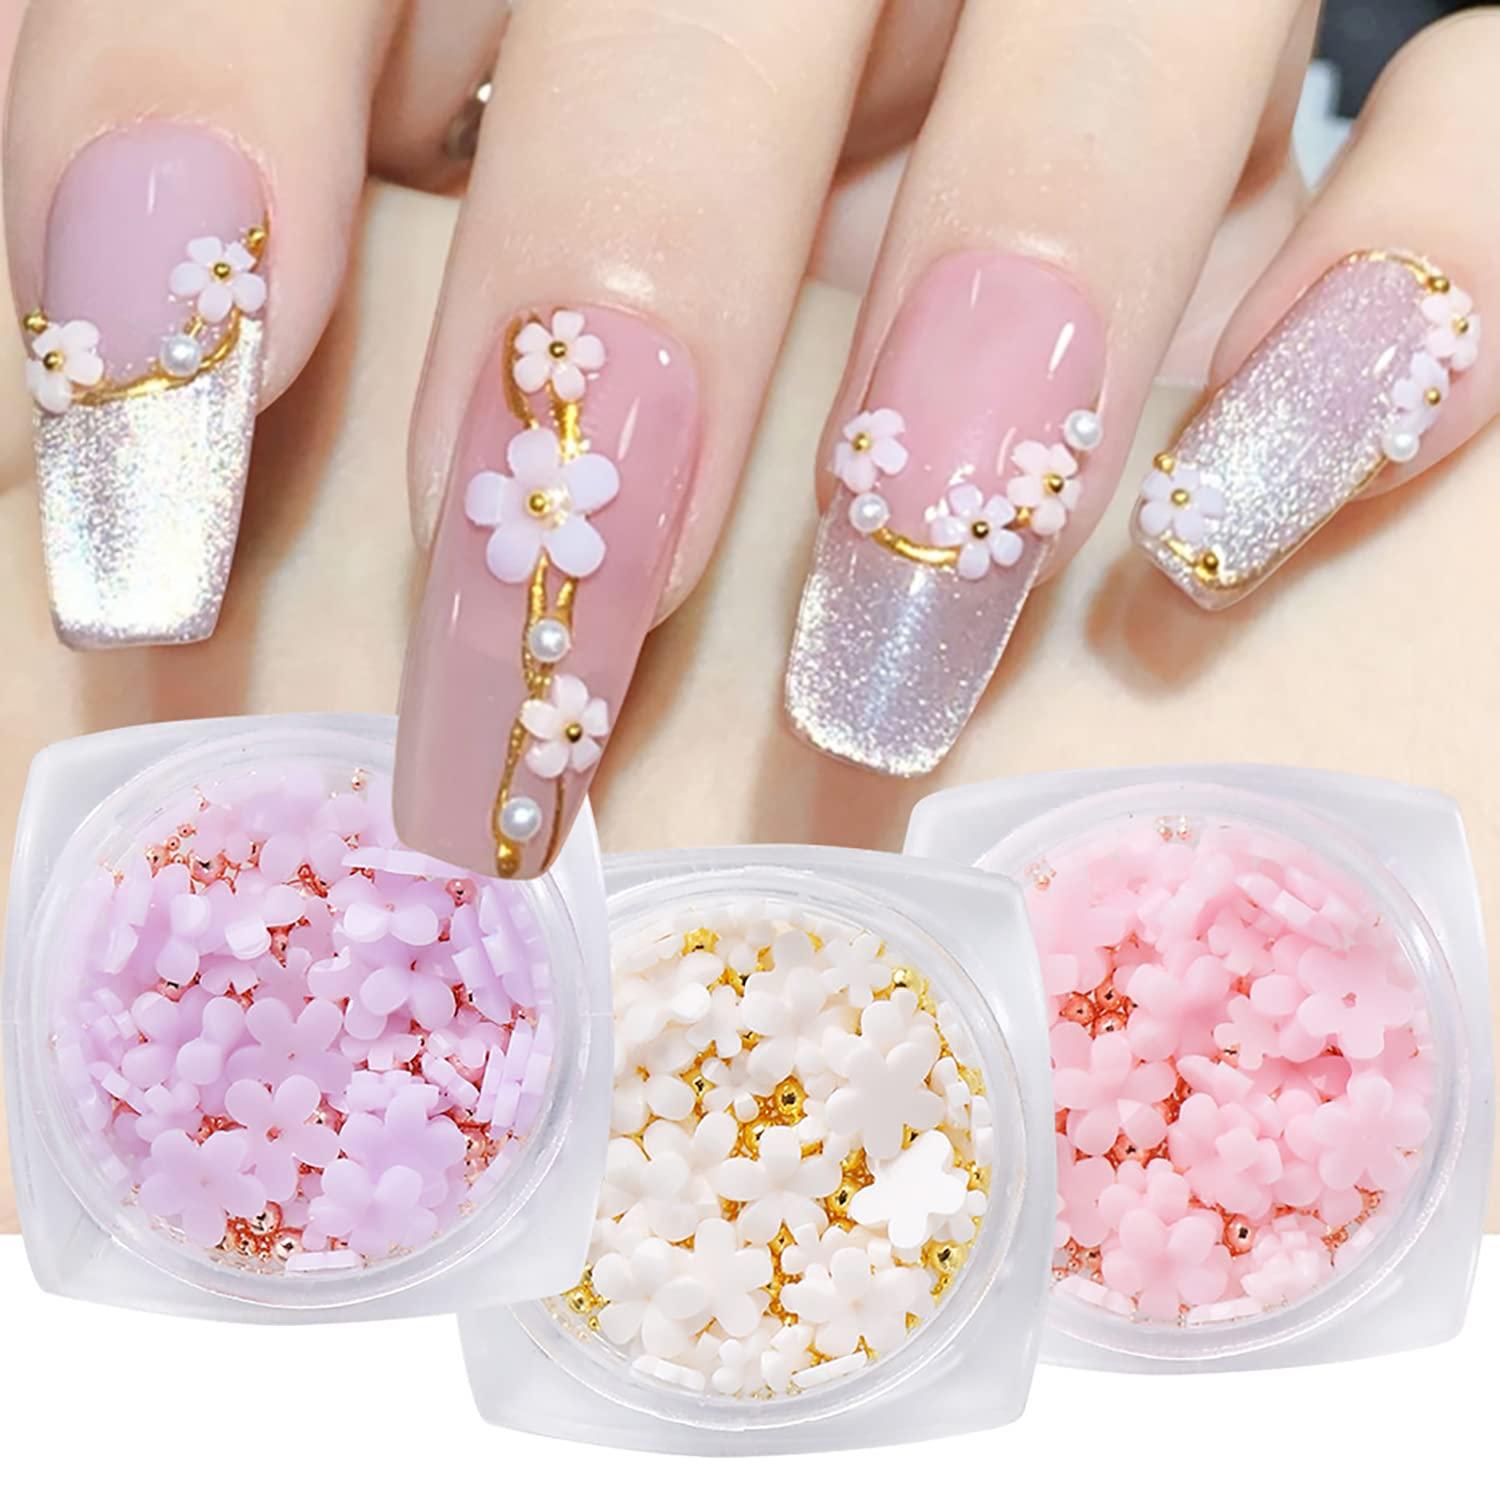 SILPECWEE Light Change Flower Nail Charms 3d Nail Flower Gold and Silver  Caviar Nail Art Charms Nail Jewelry for Acrylic Nails DIY Craft Nail Design  Accessories Nail Art Supplies (6 Boxes)